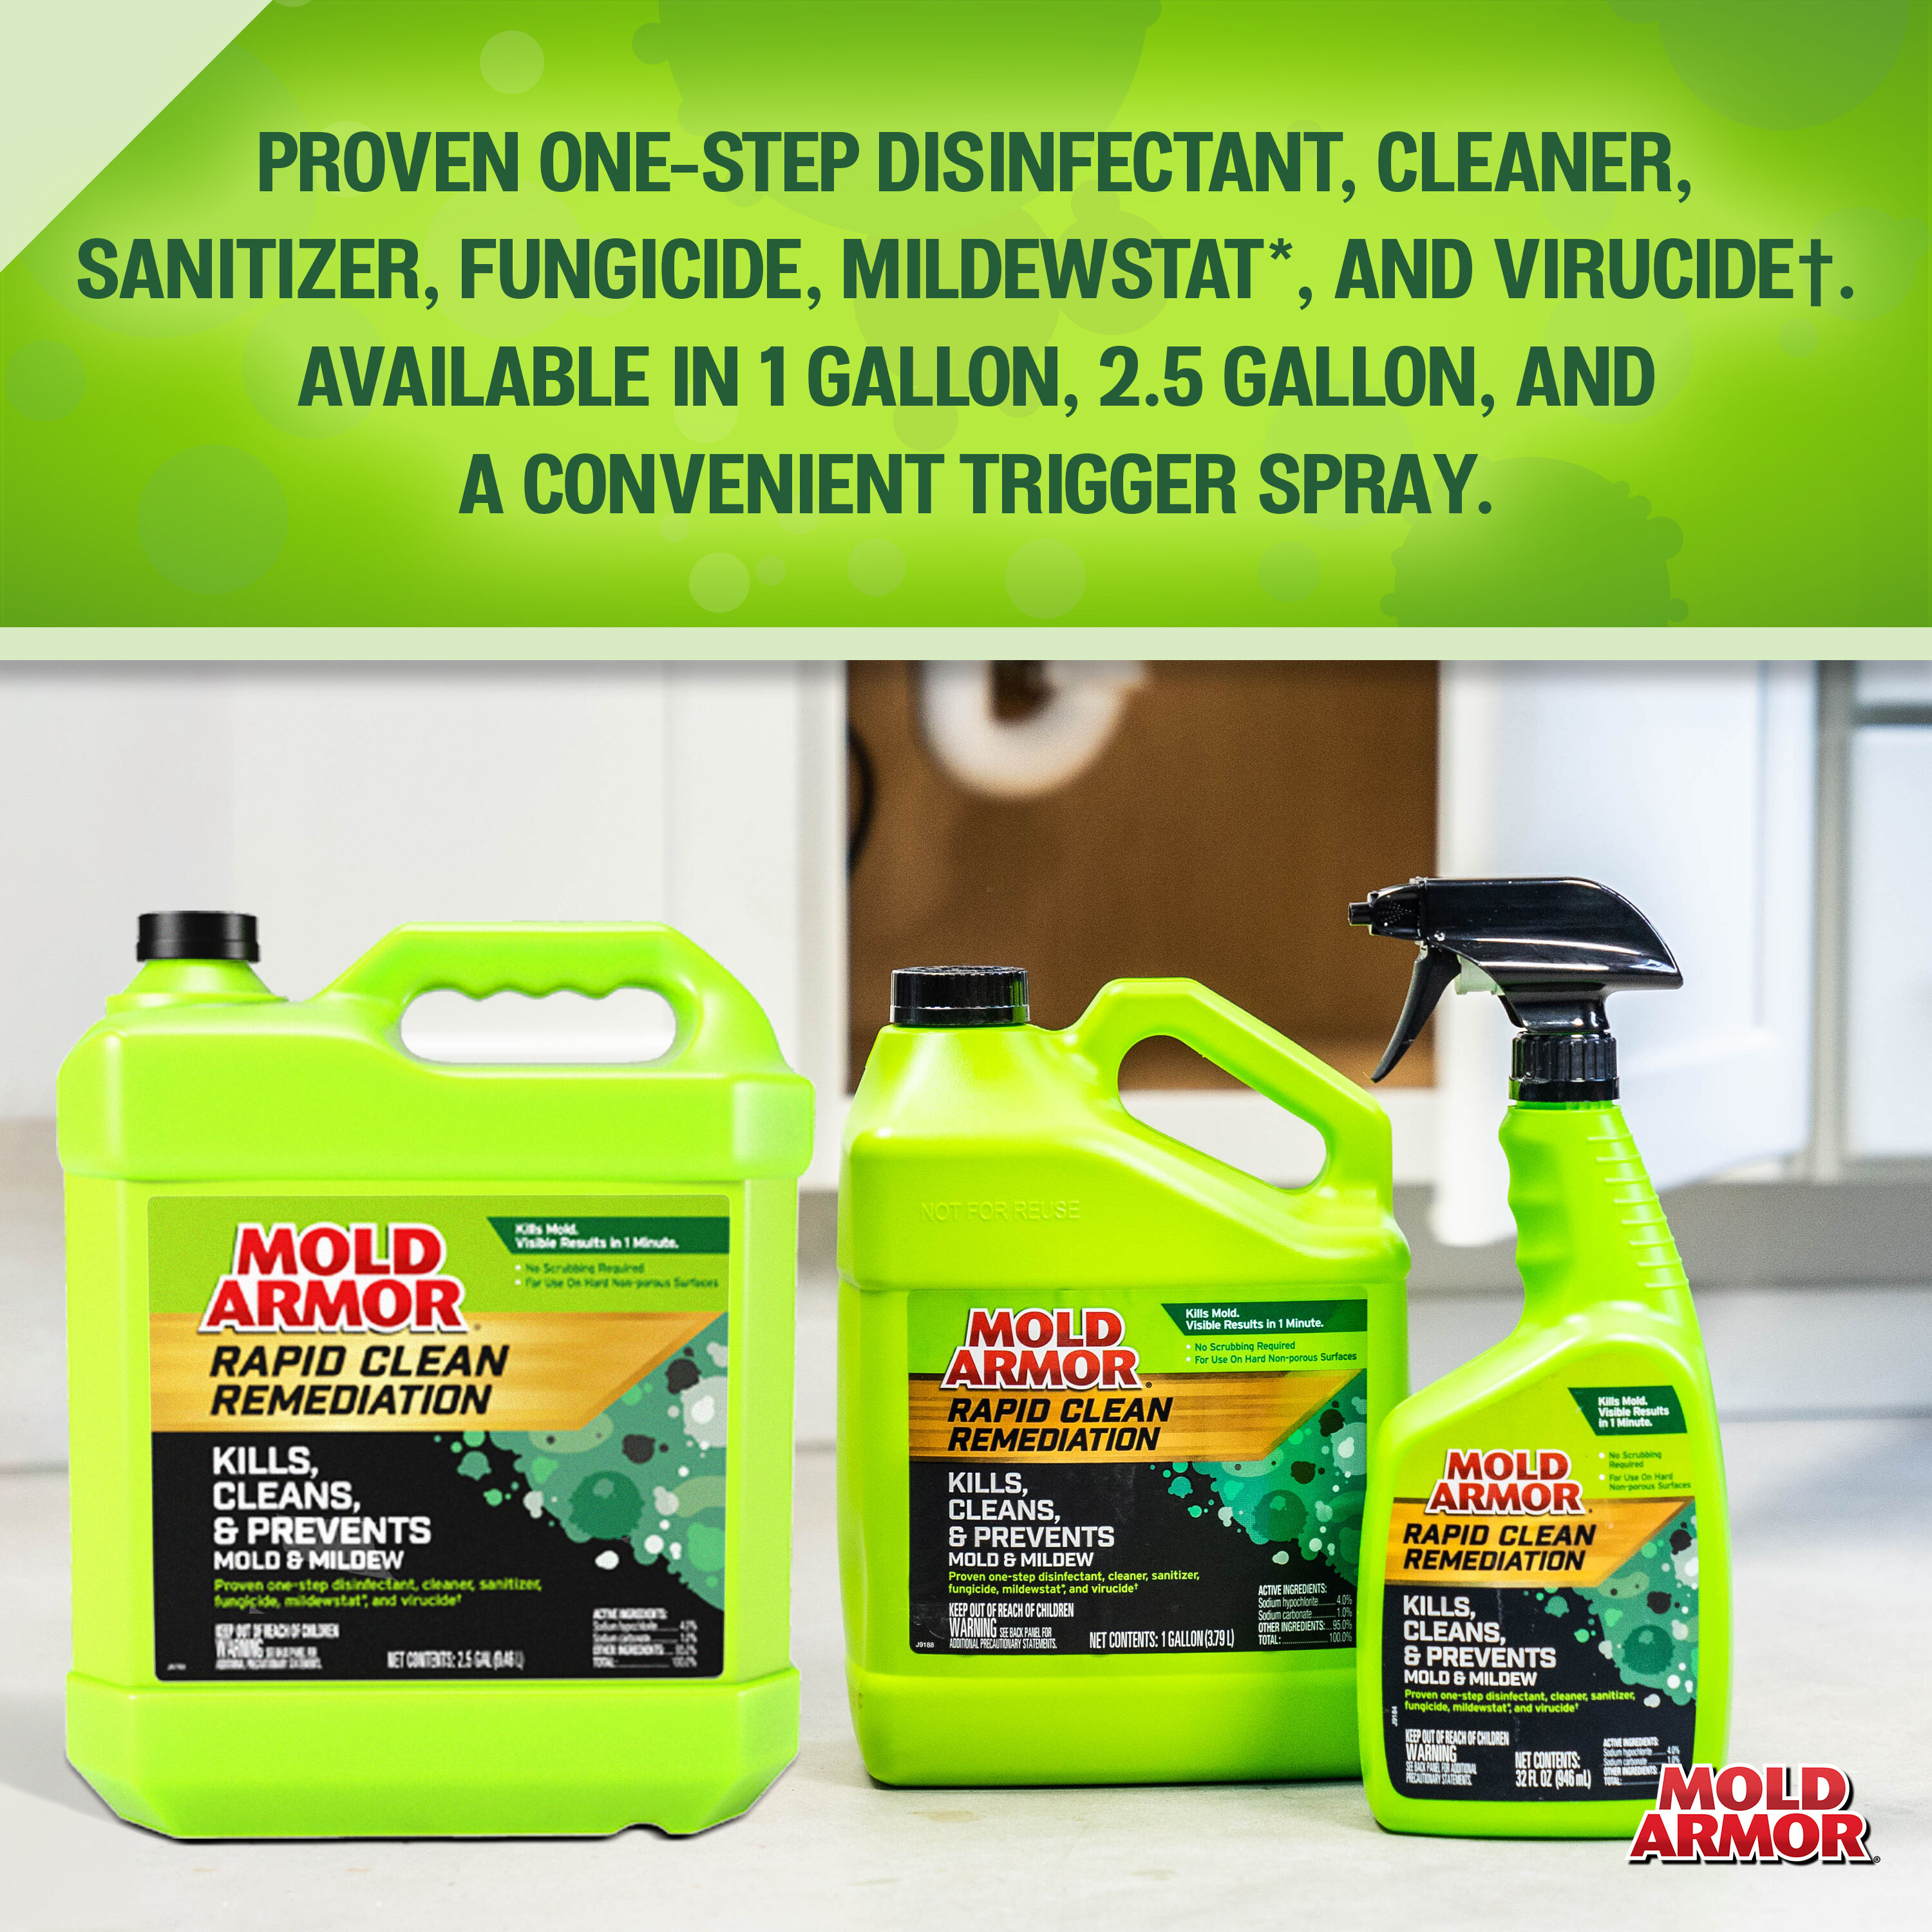 Mold Armor 32 fl oz Mold Remover: Kills, Cleans, and Prevents Mold and  Mildew, One-Step Remediation, Disinfects and Sanitizes in the Mold Removers  department at